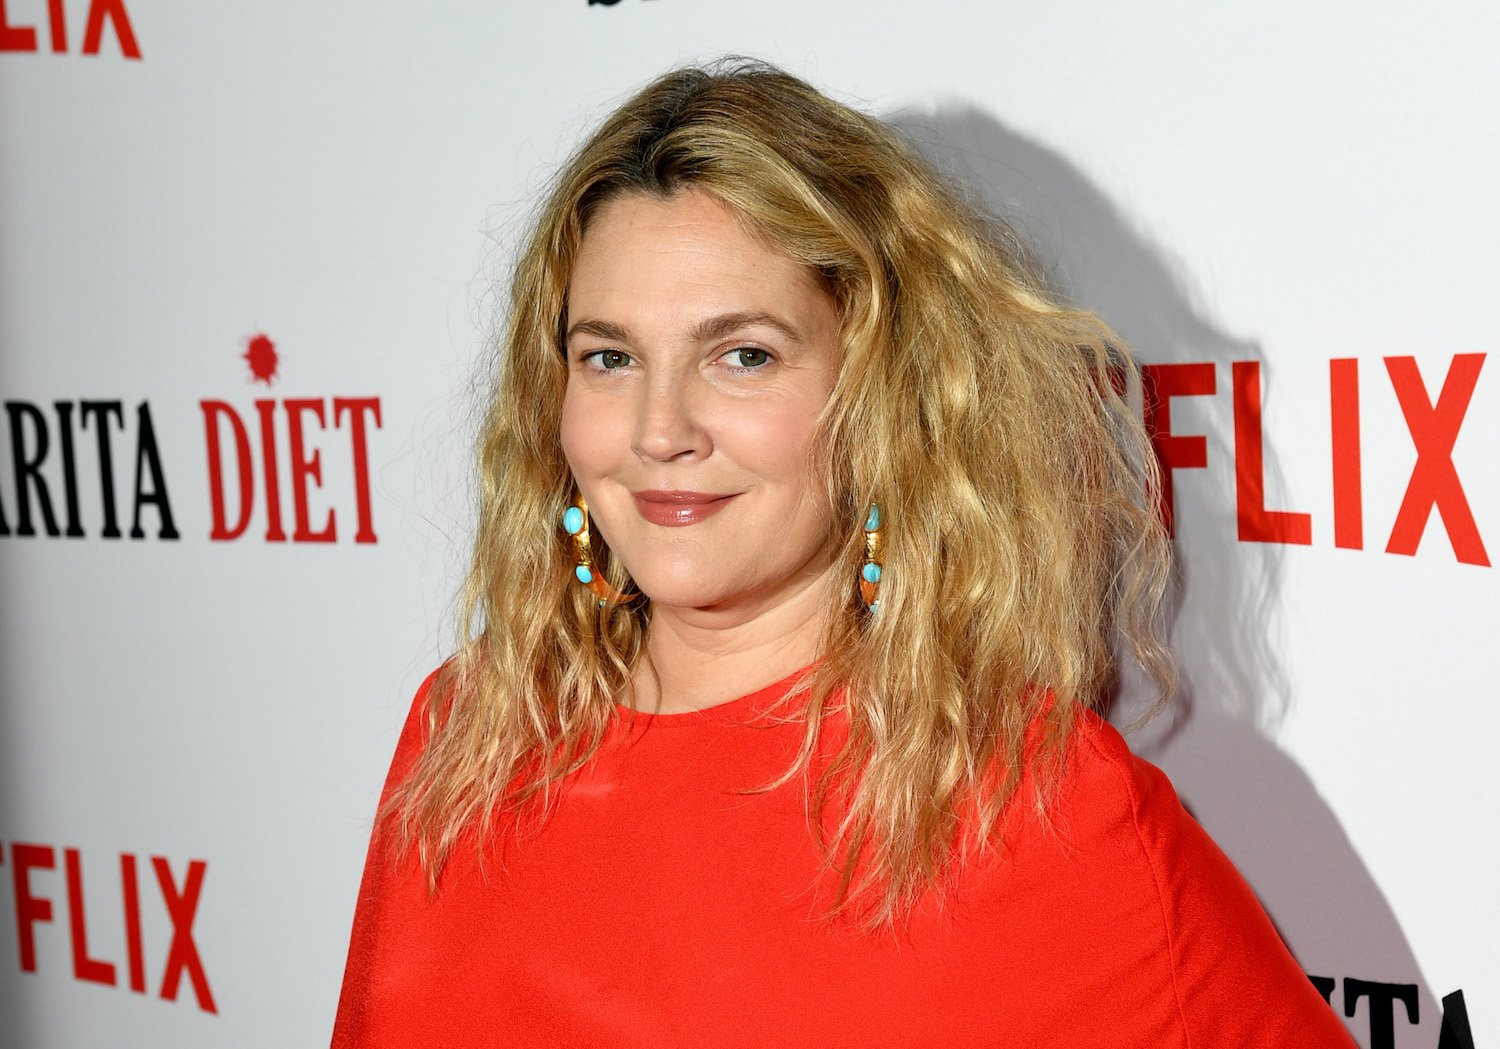 Drew Barrymore wears a red dress and smiles at the premiere of Netflix's 'Santa Clarita Diet' season 2